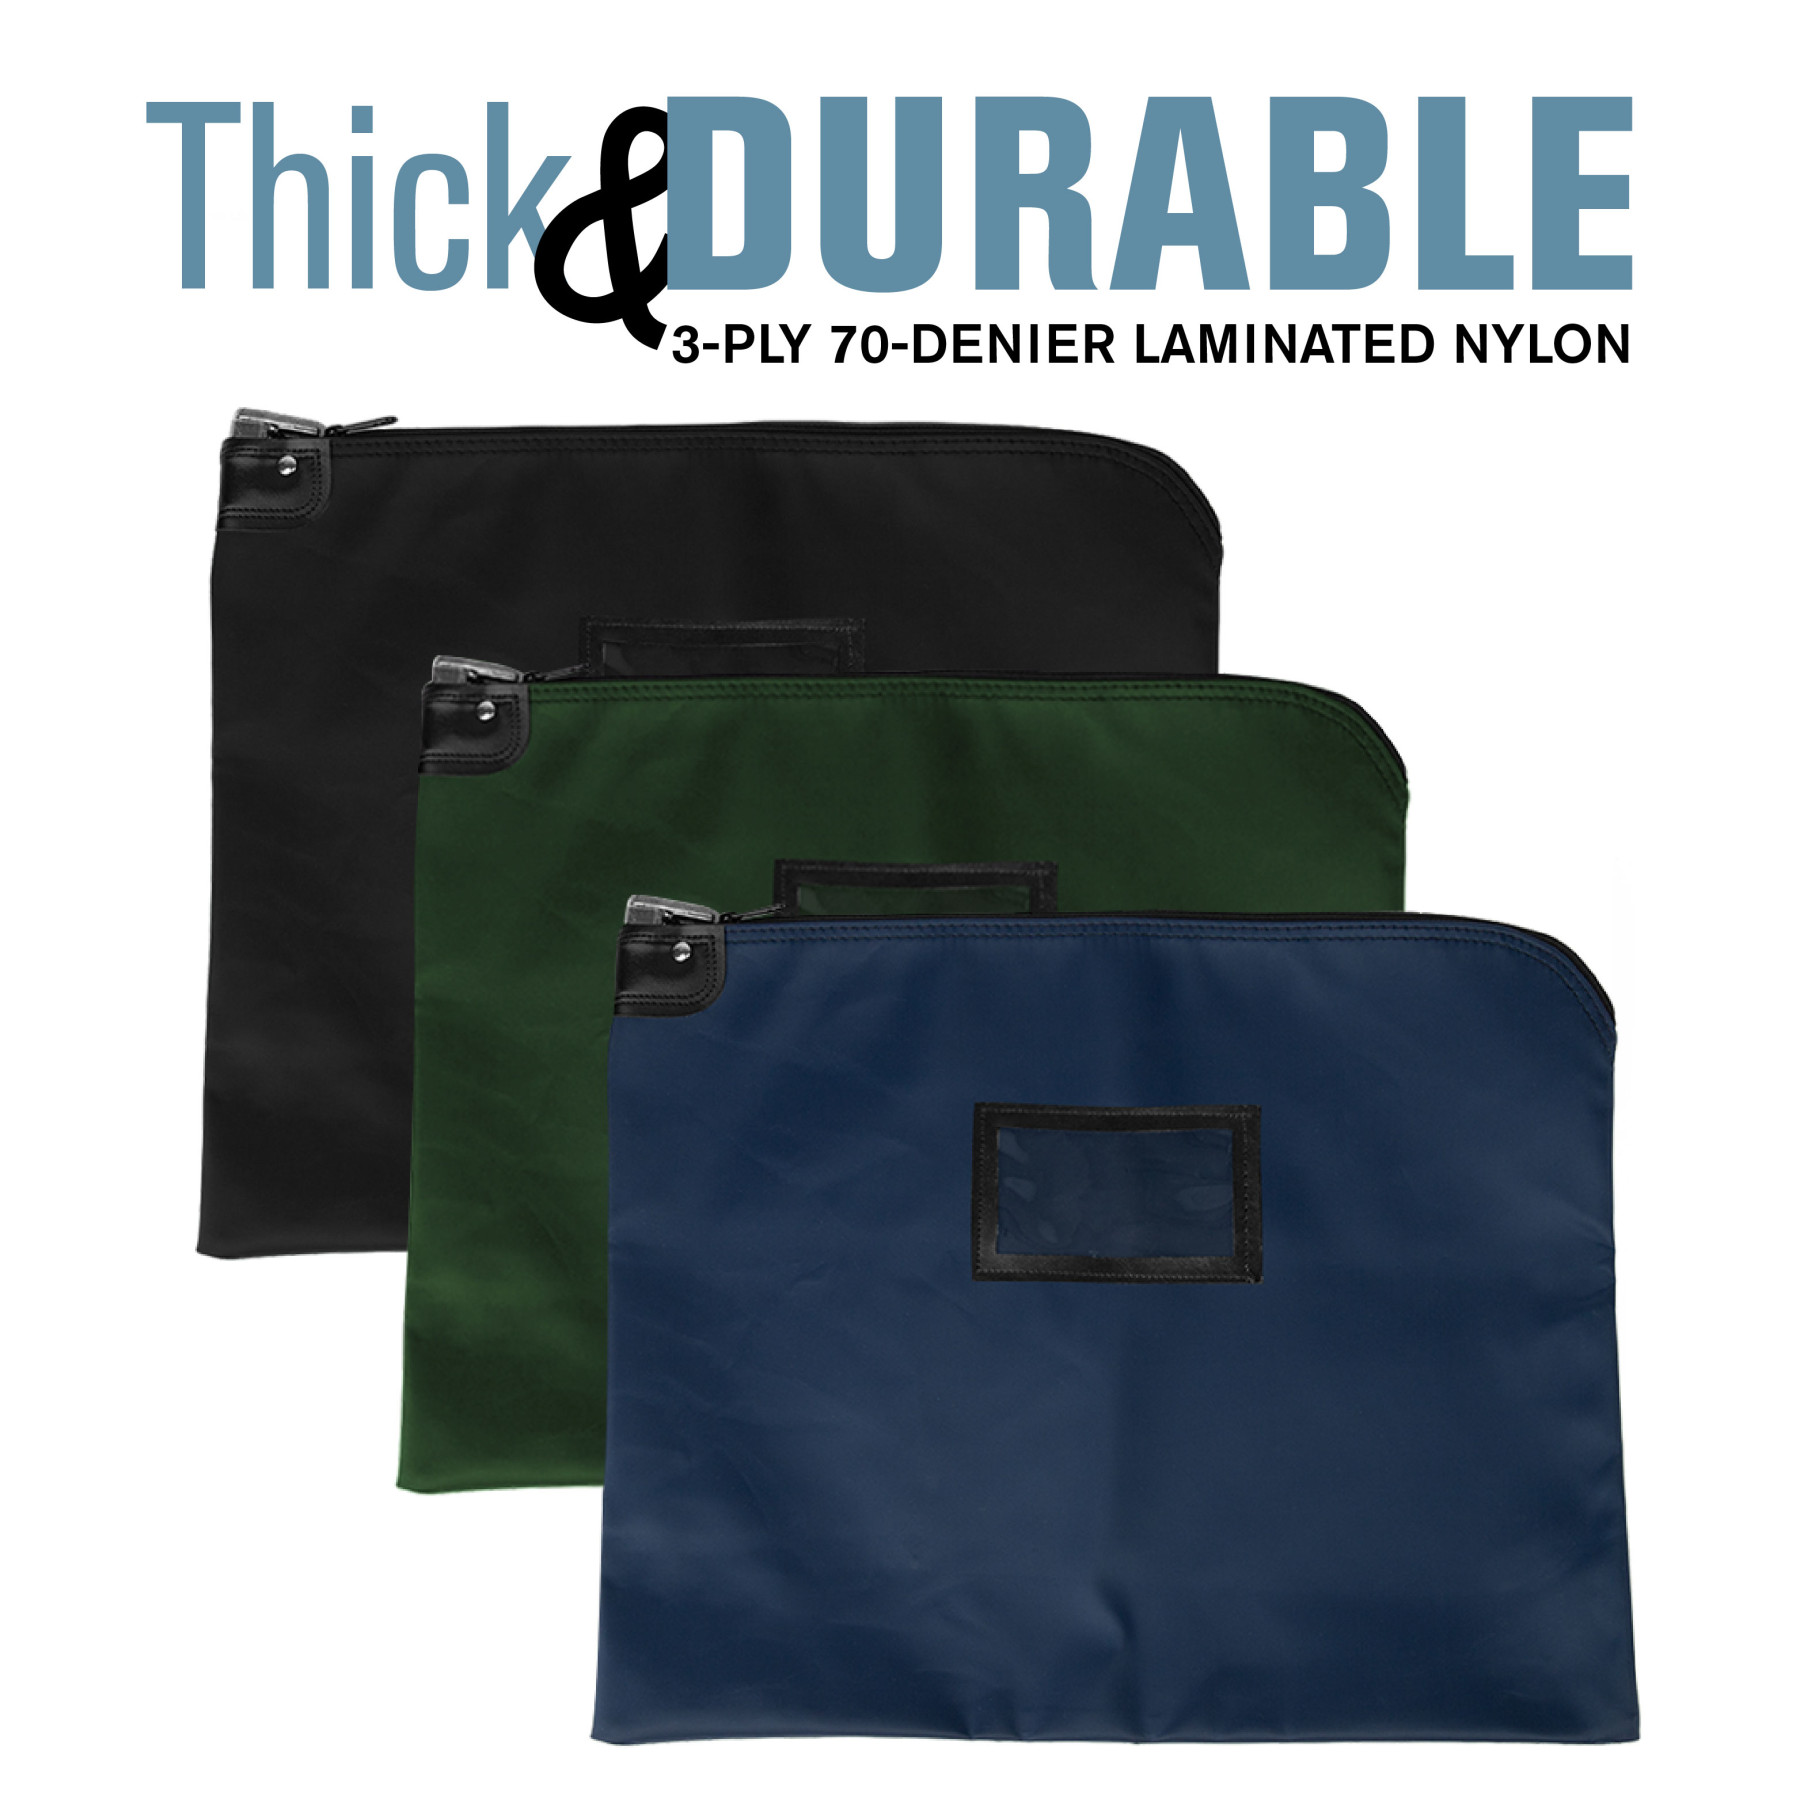 Laminated Nylon HIPAA Locking Courier Bags with Cardholder - 19W x 15H